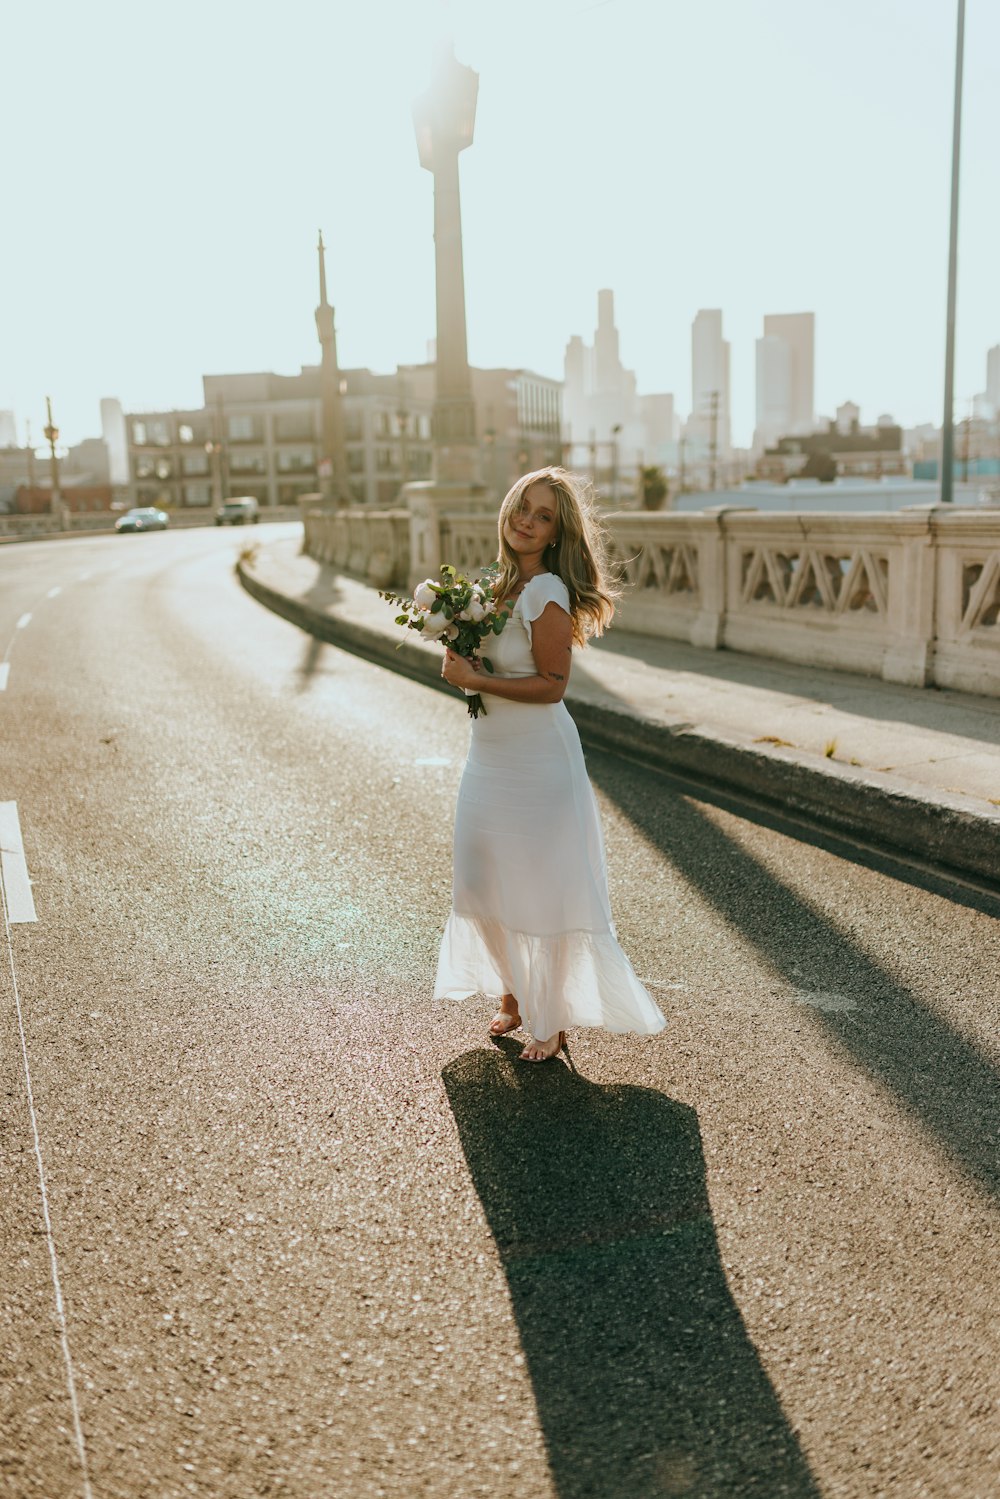 woman in white dress holding bouquet of flowers walking on sidewalk during daytime